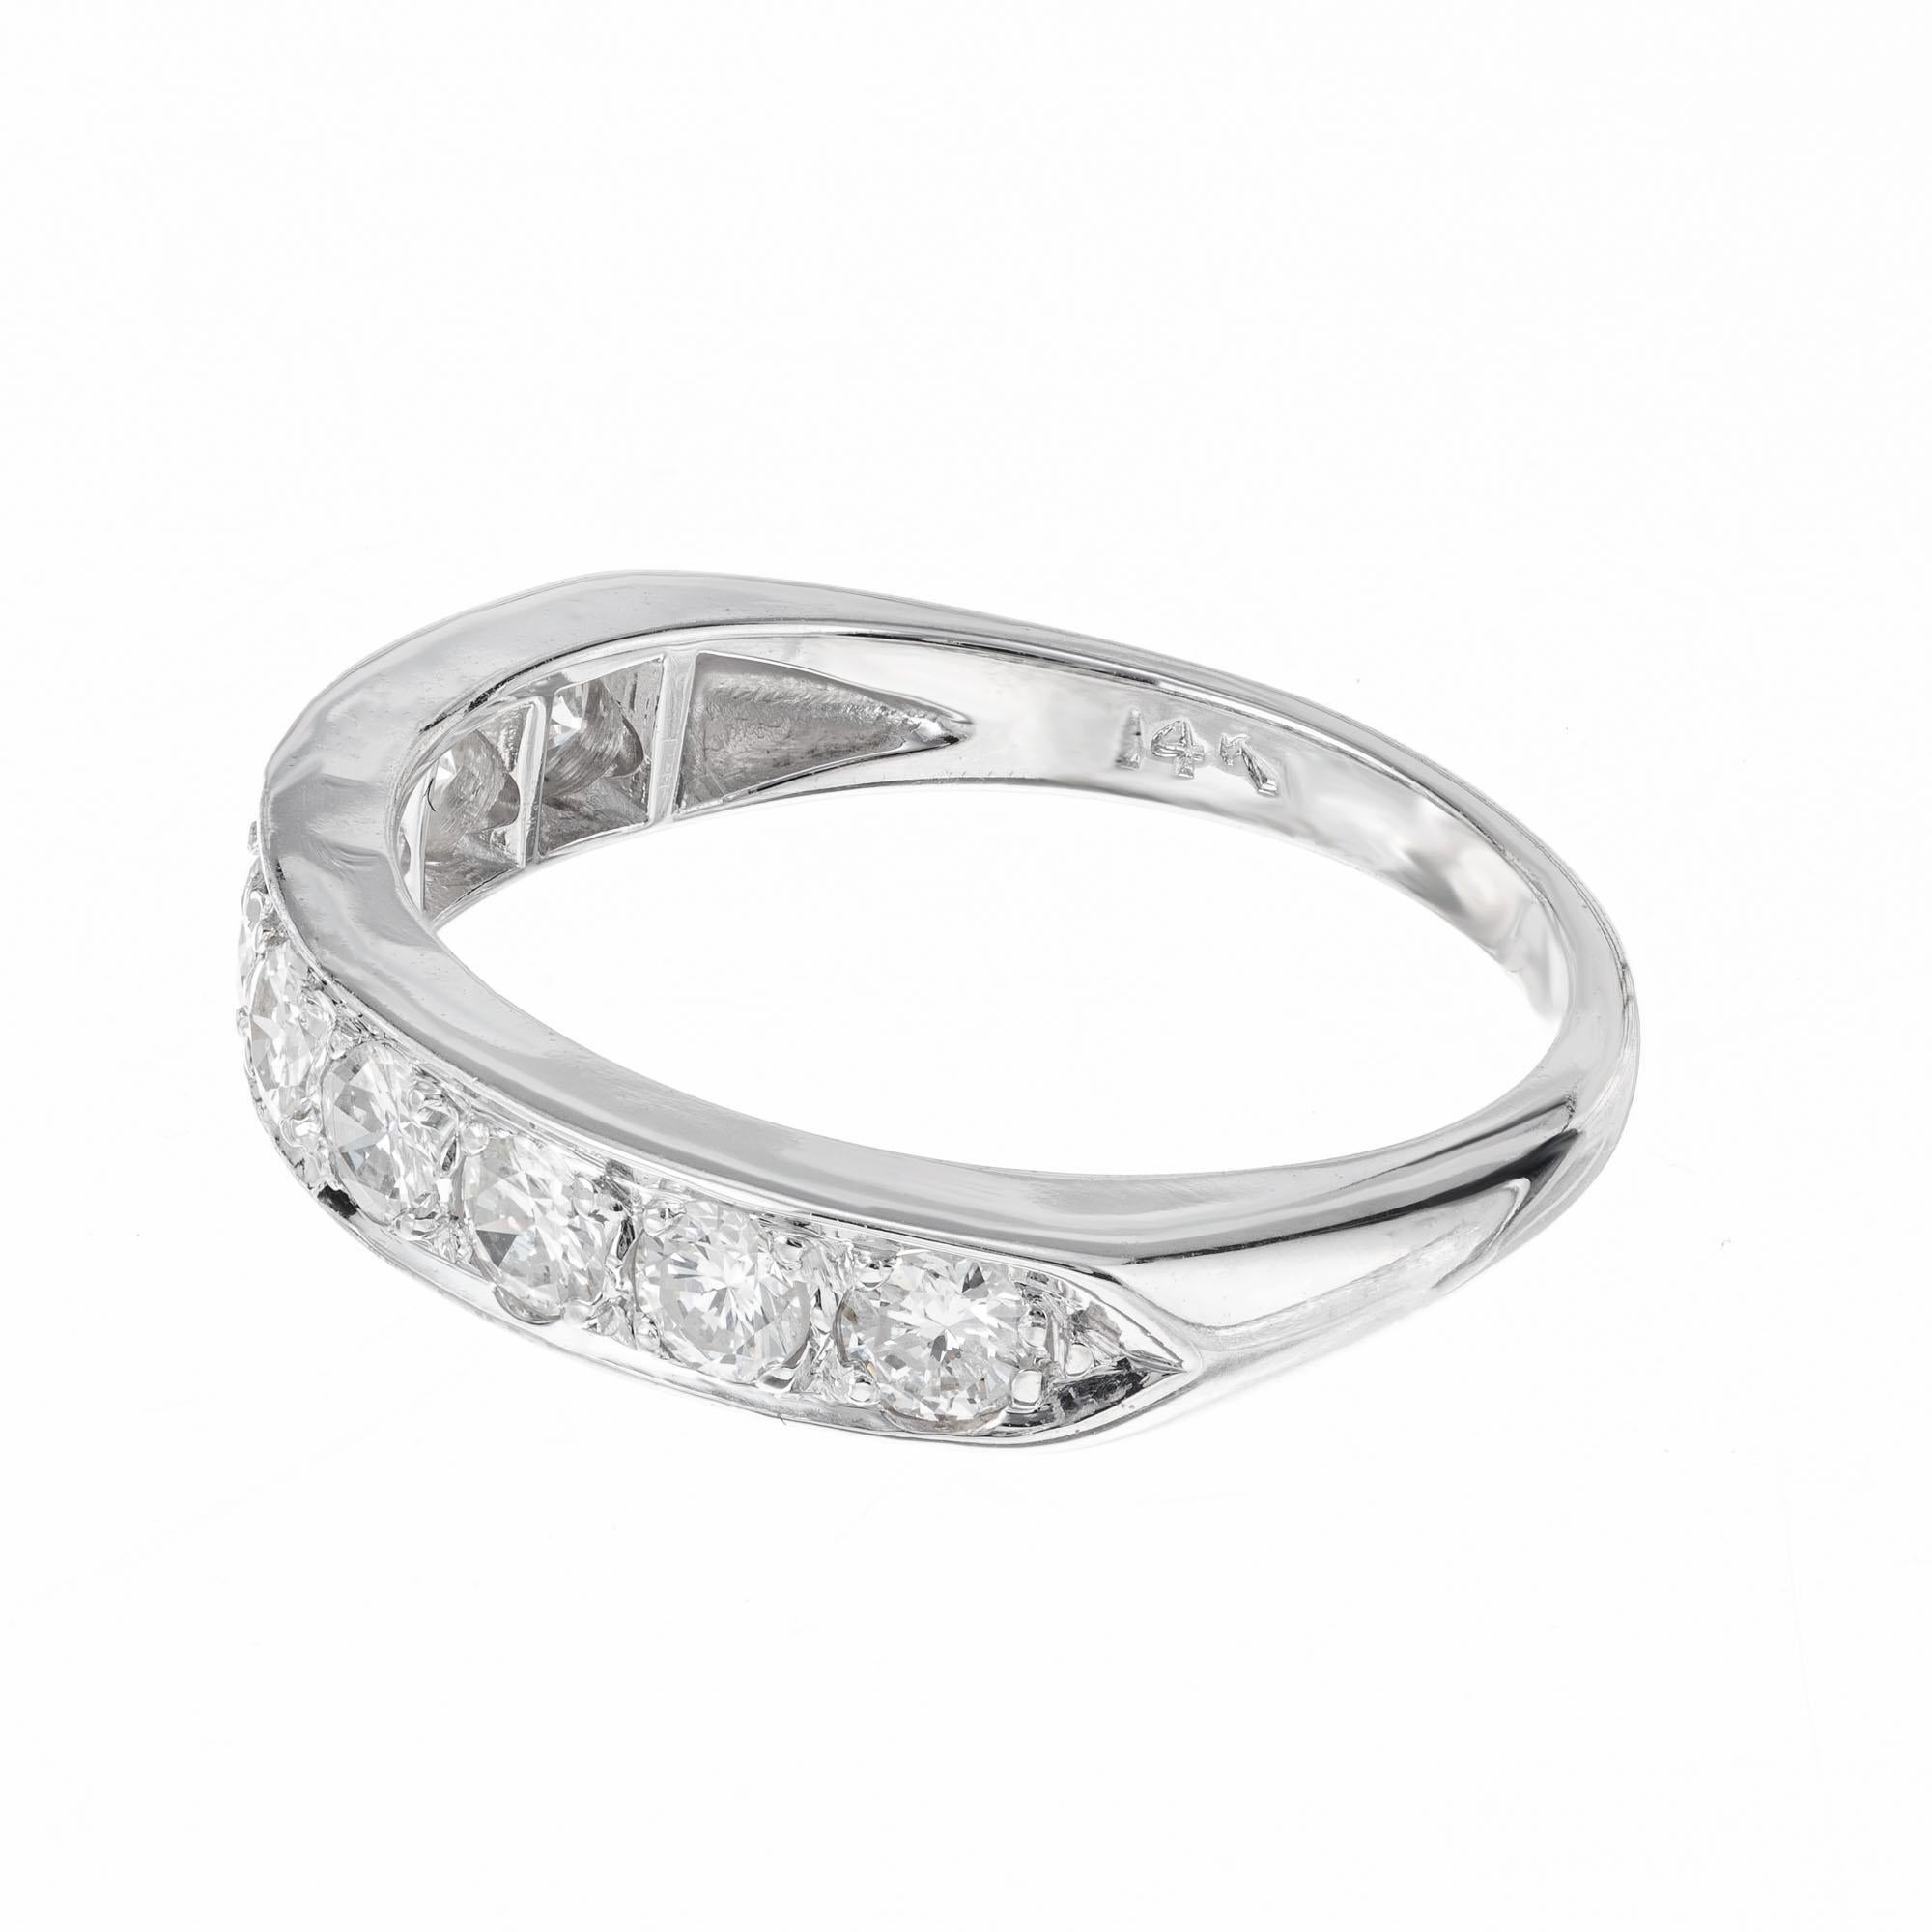 .54 Carat Diamond White Gold Wedding Band In Good Condition For Sale In Stamford, CT